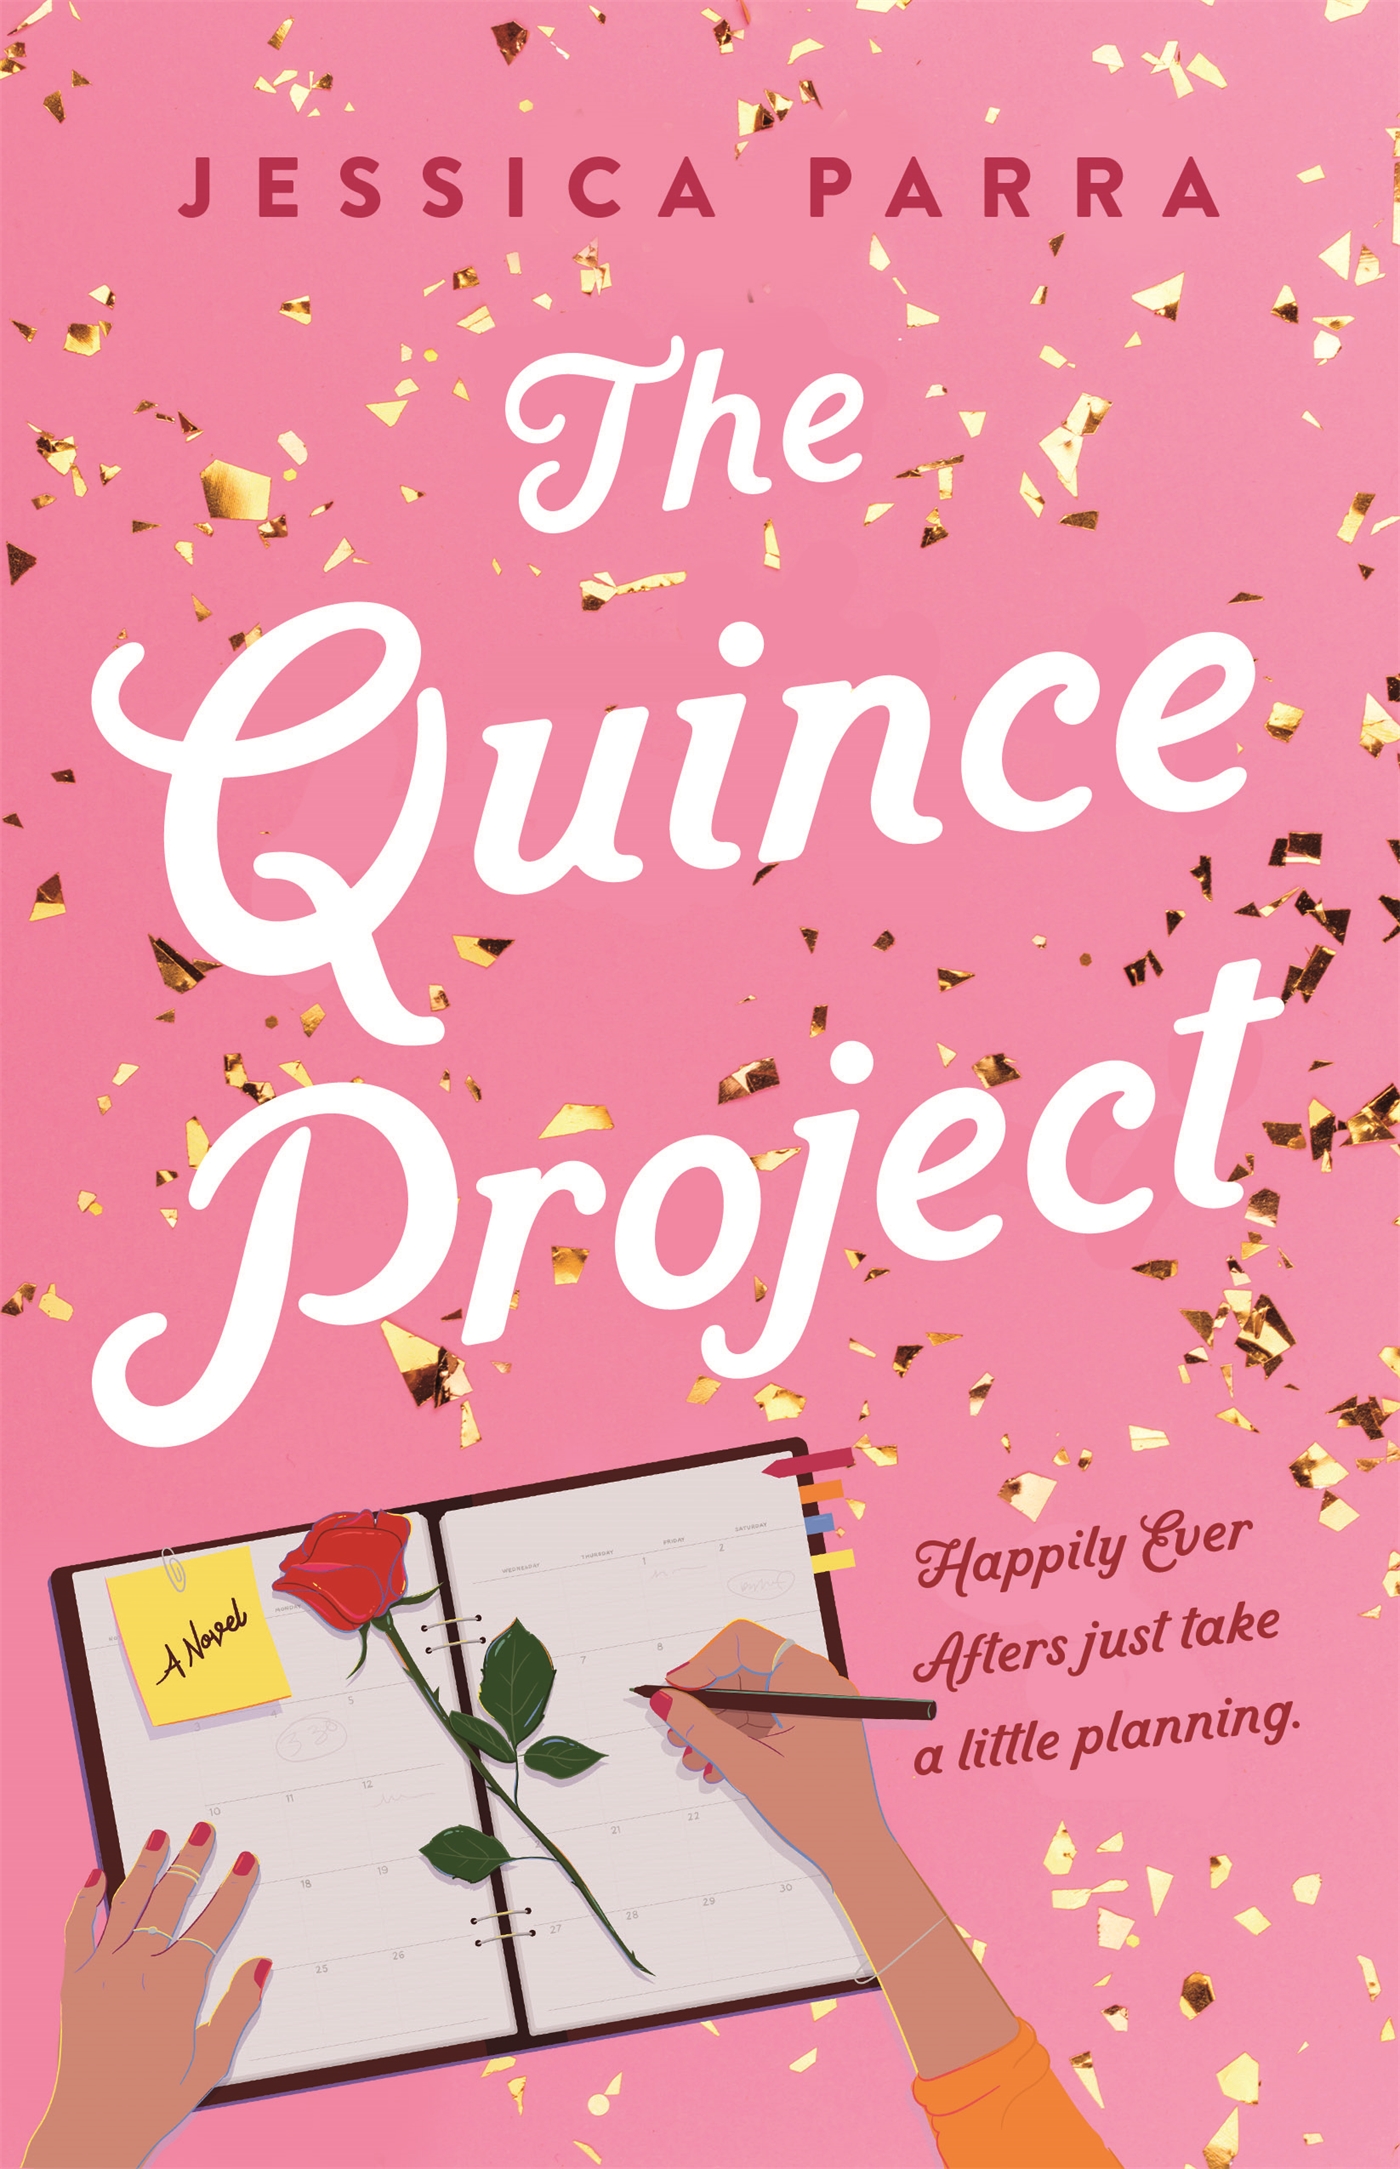 Giveaway: The Quince Project (Jessica Parra)~ US/CAN ONLY!